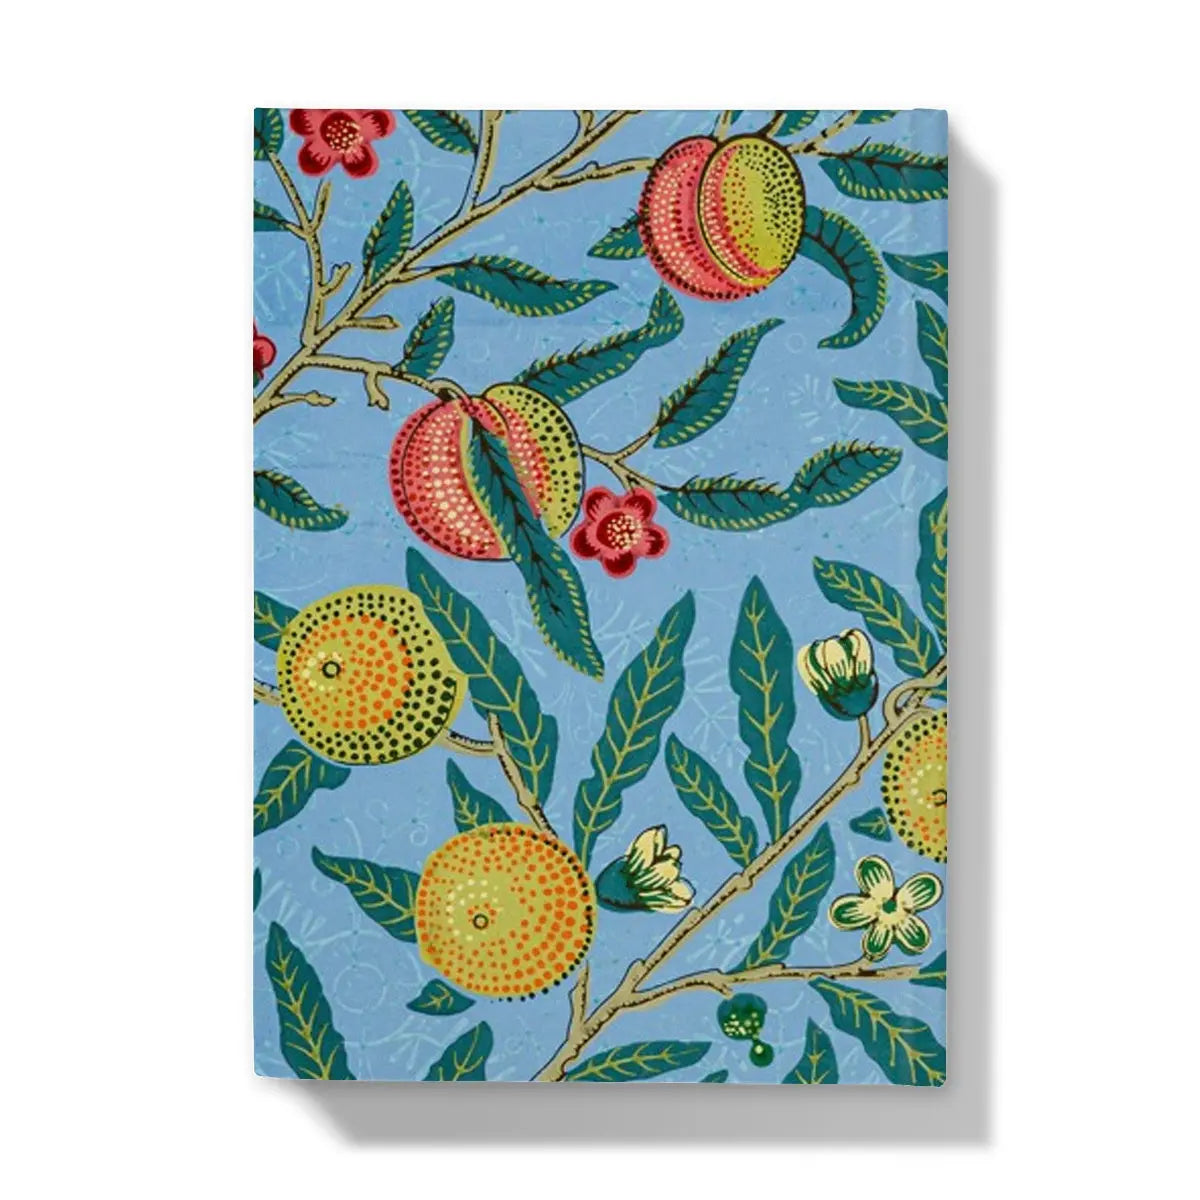 Four Fruits By William Morris Hardback Journal - Notebooks & Notepads - Aesthetic Art